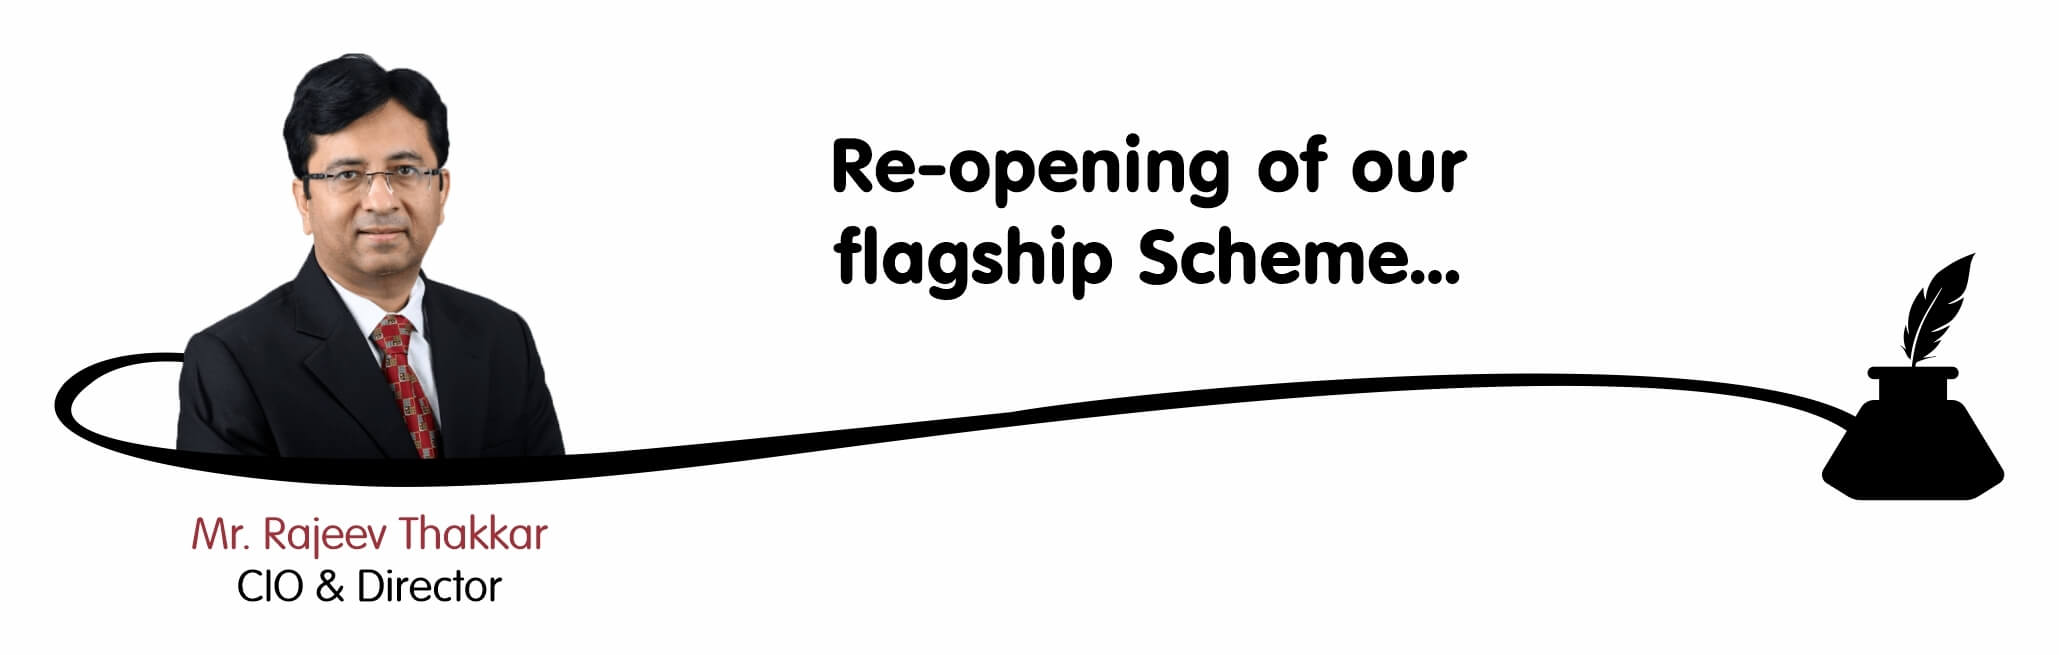 Re-opening of our flagship Scheme